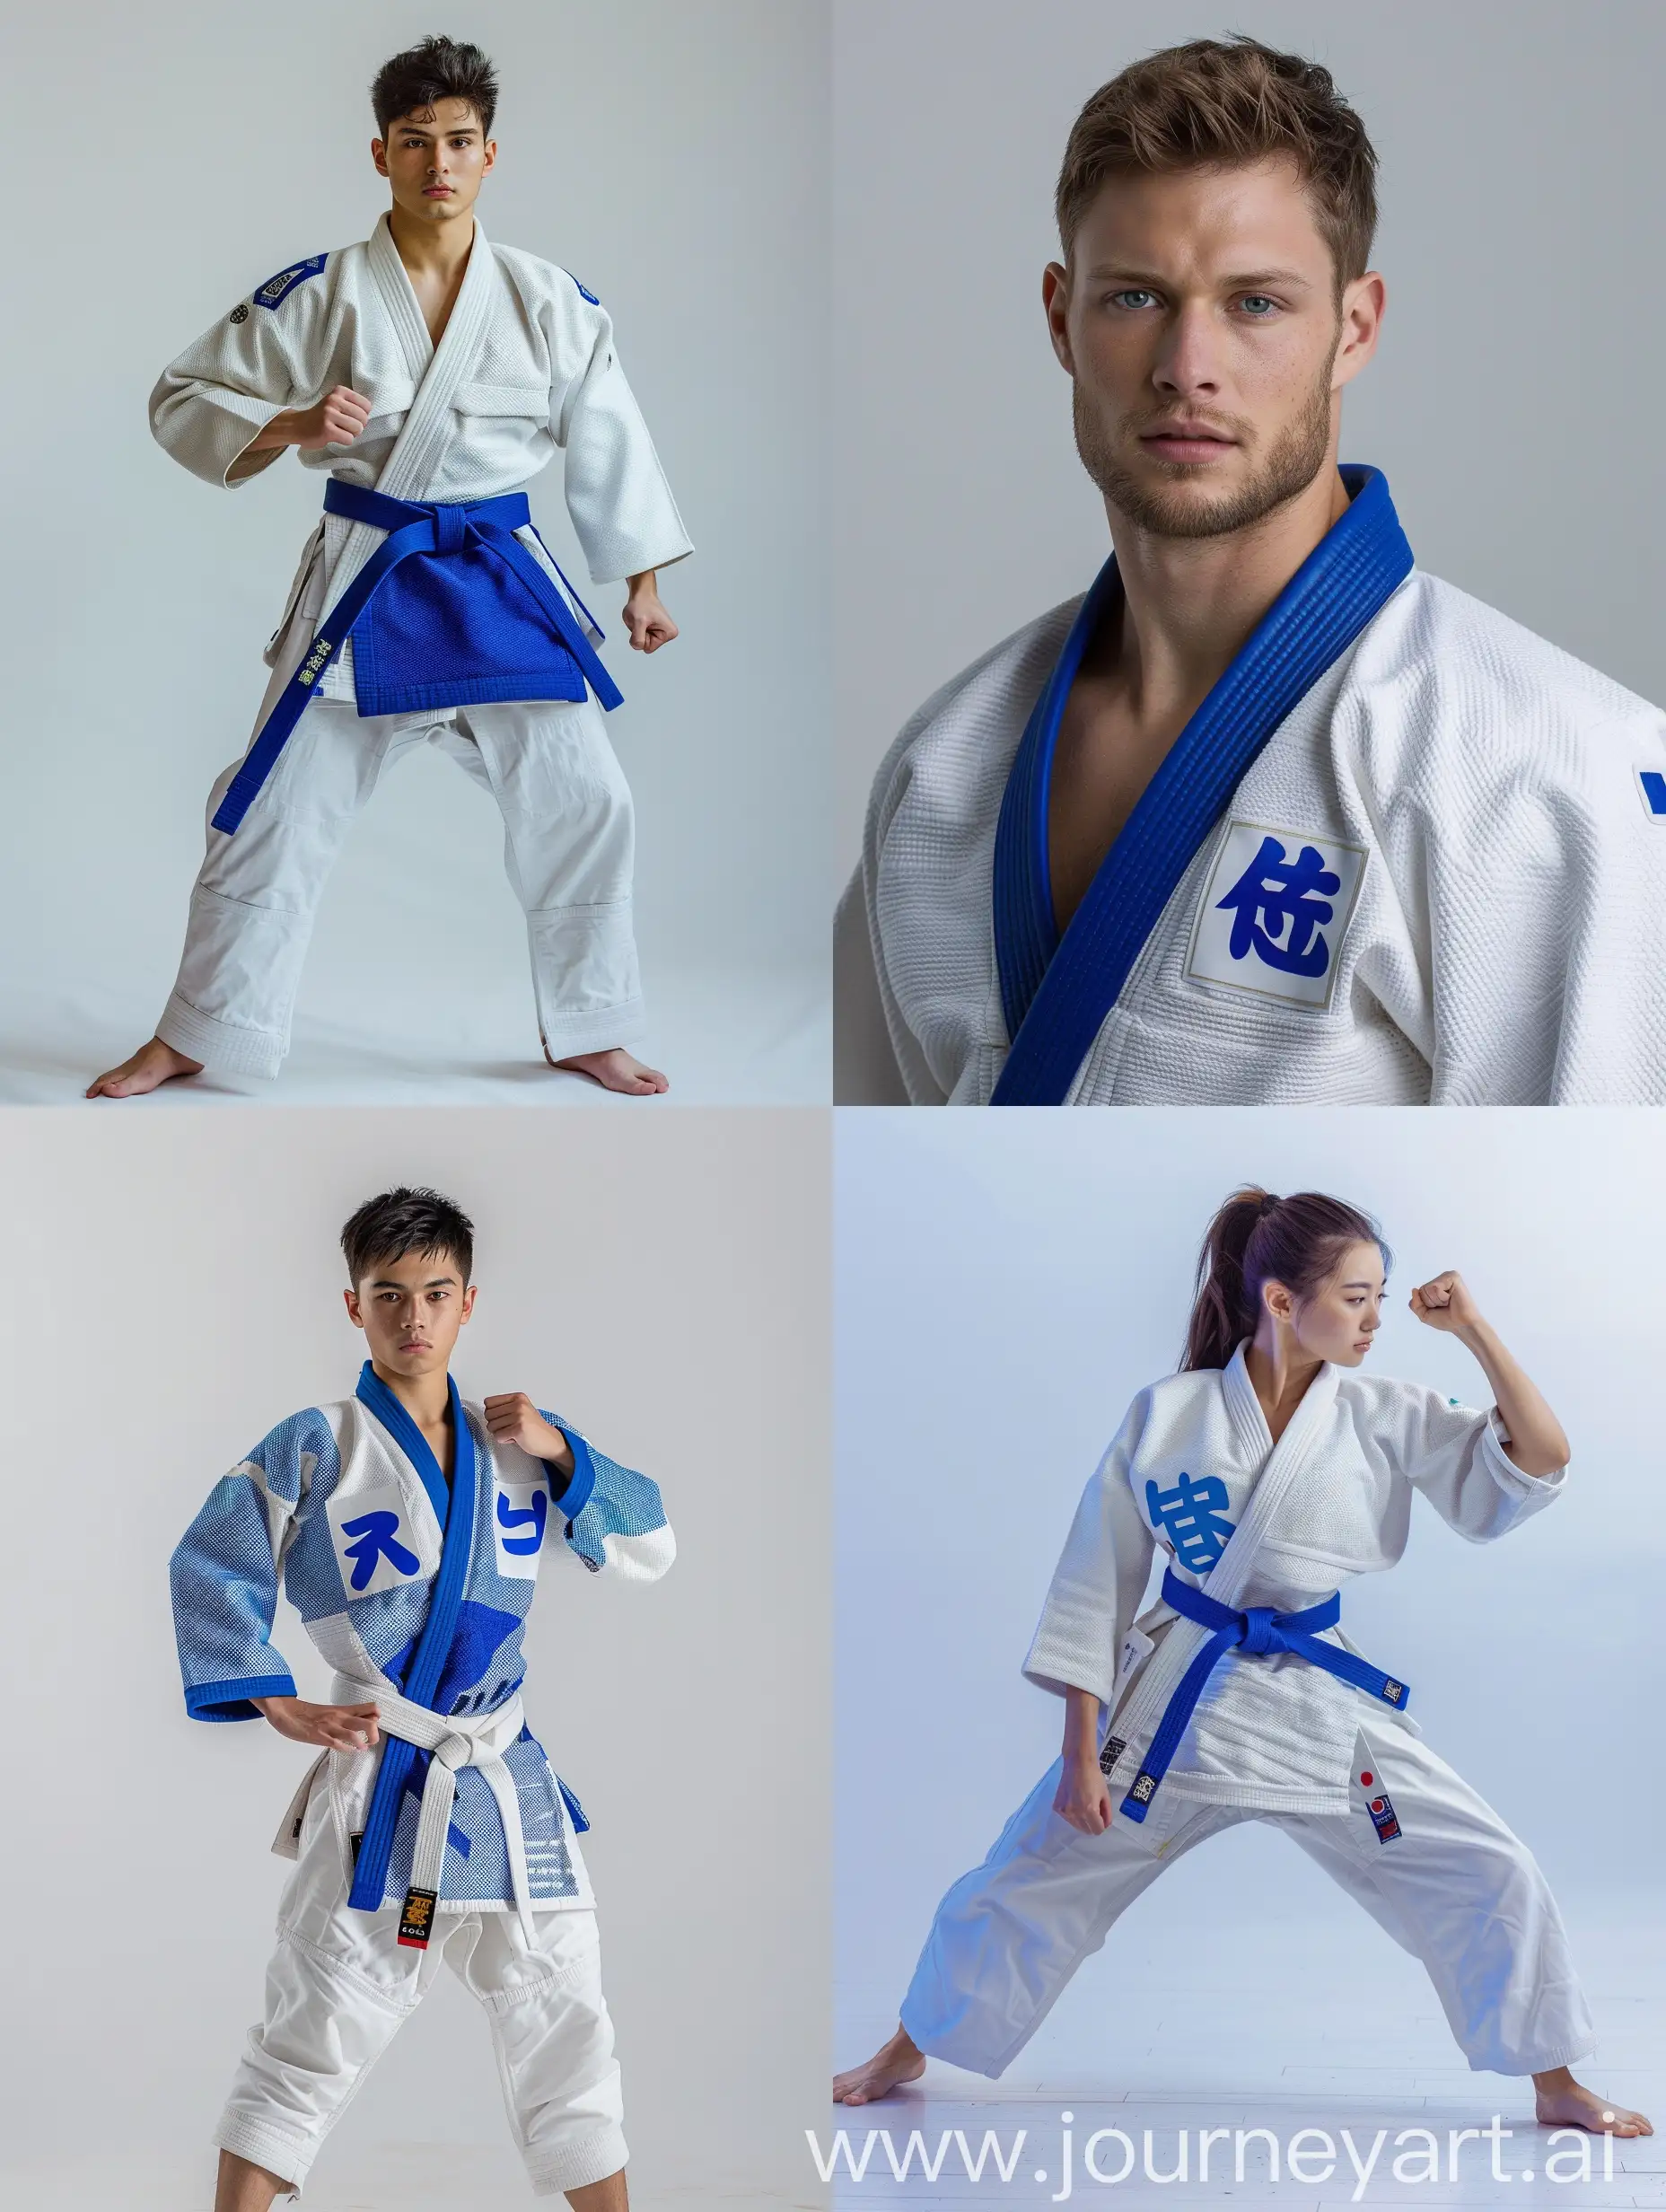 make in  photo for my judo club business use japanise letter  use  blue and white colors
